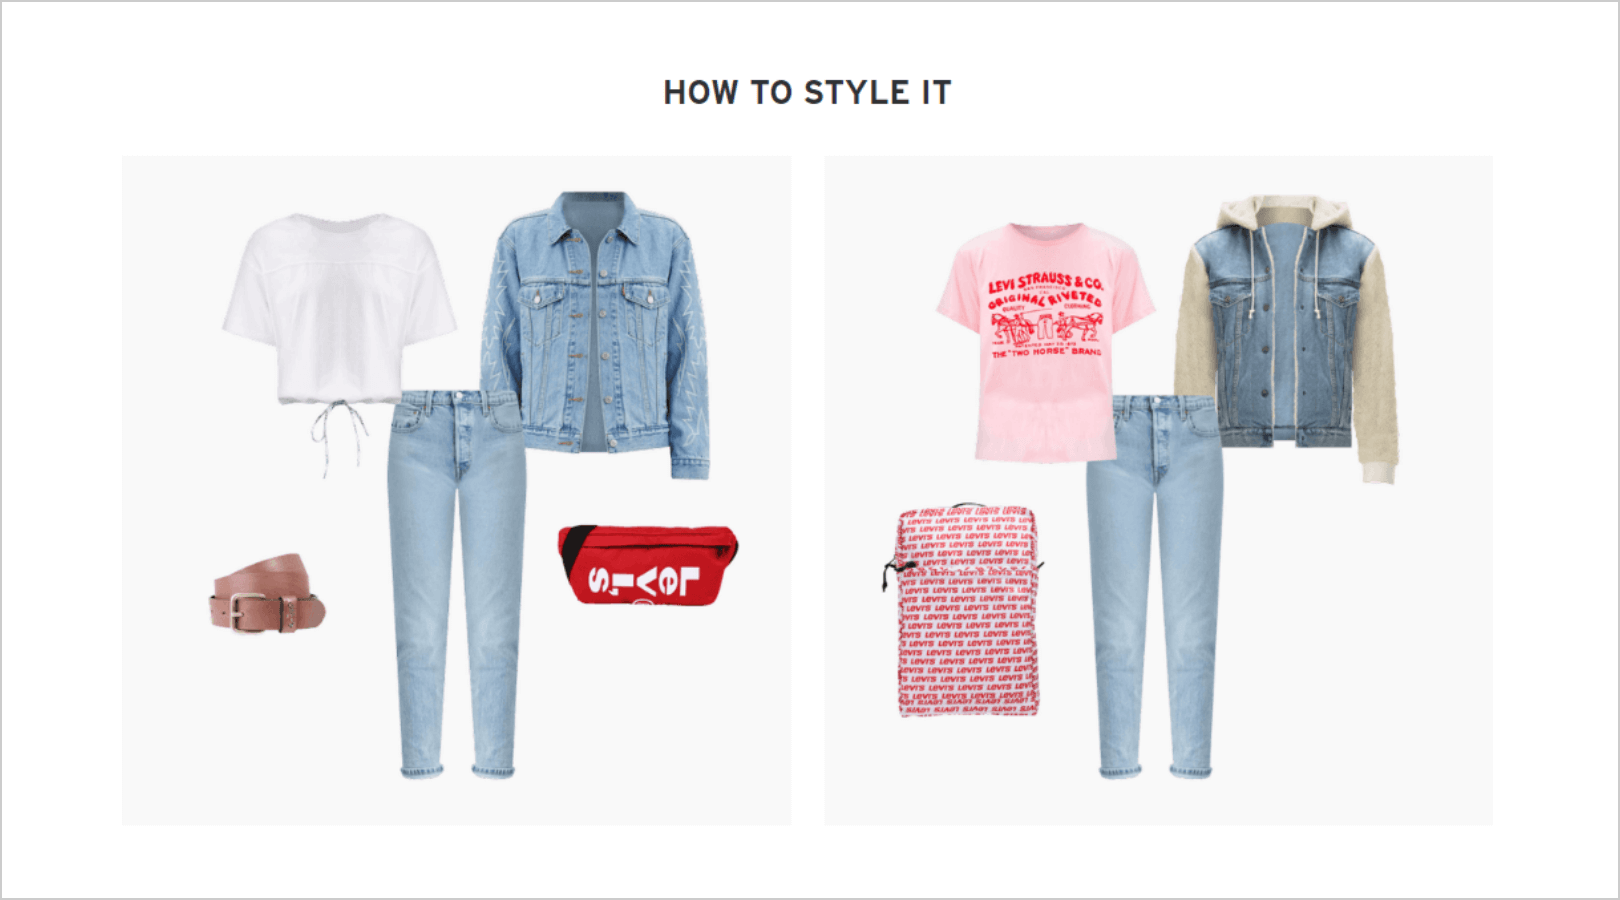 Levis product linking practice